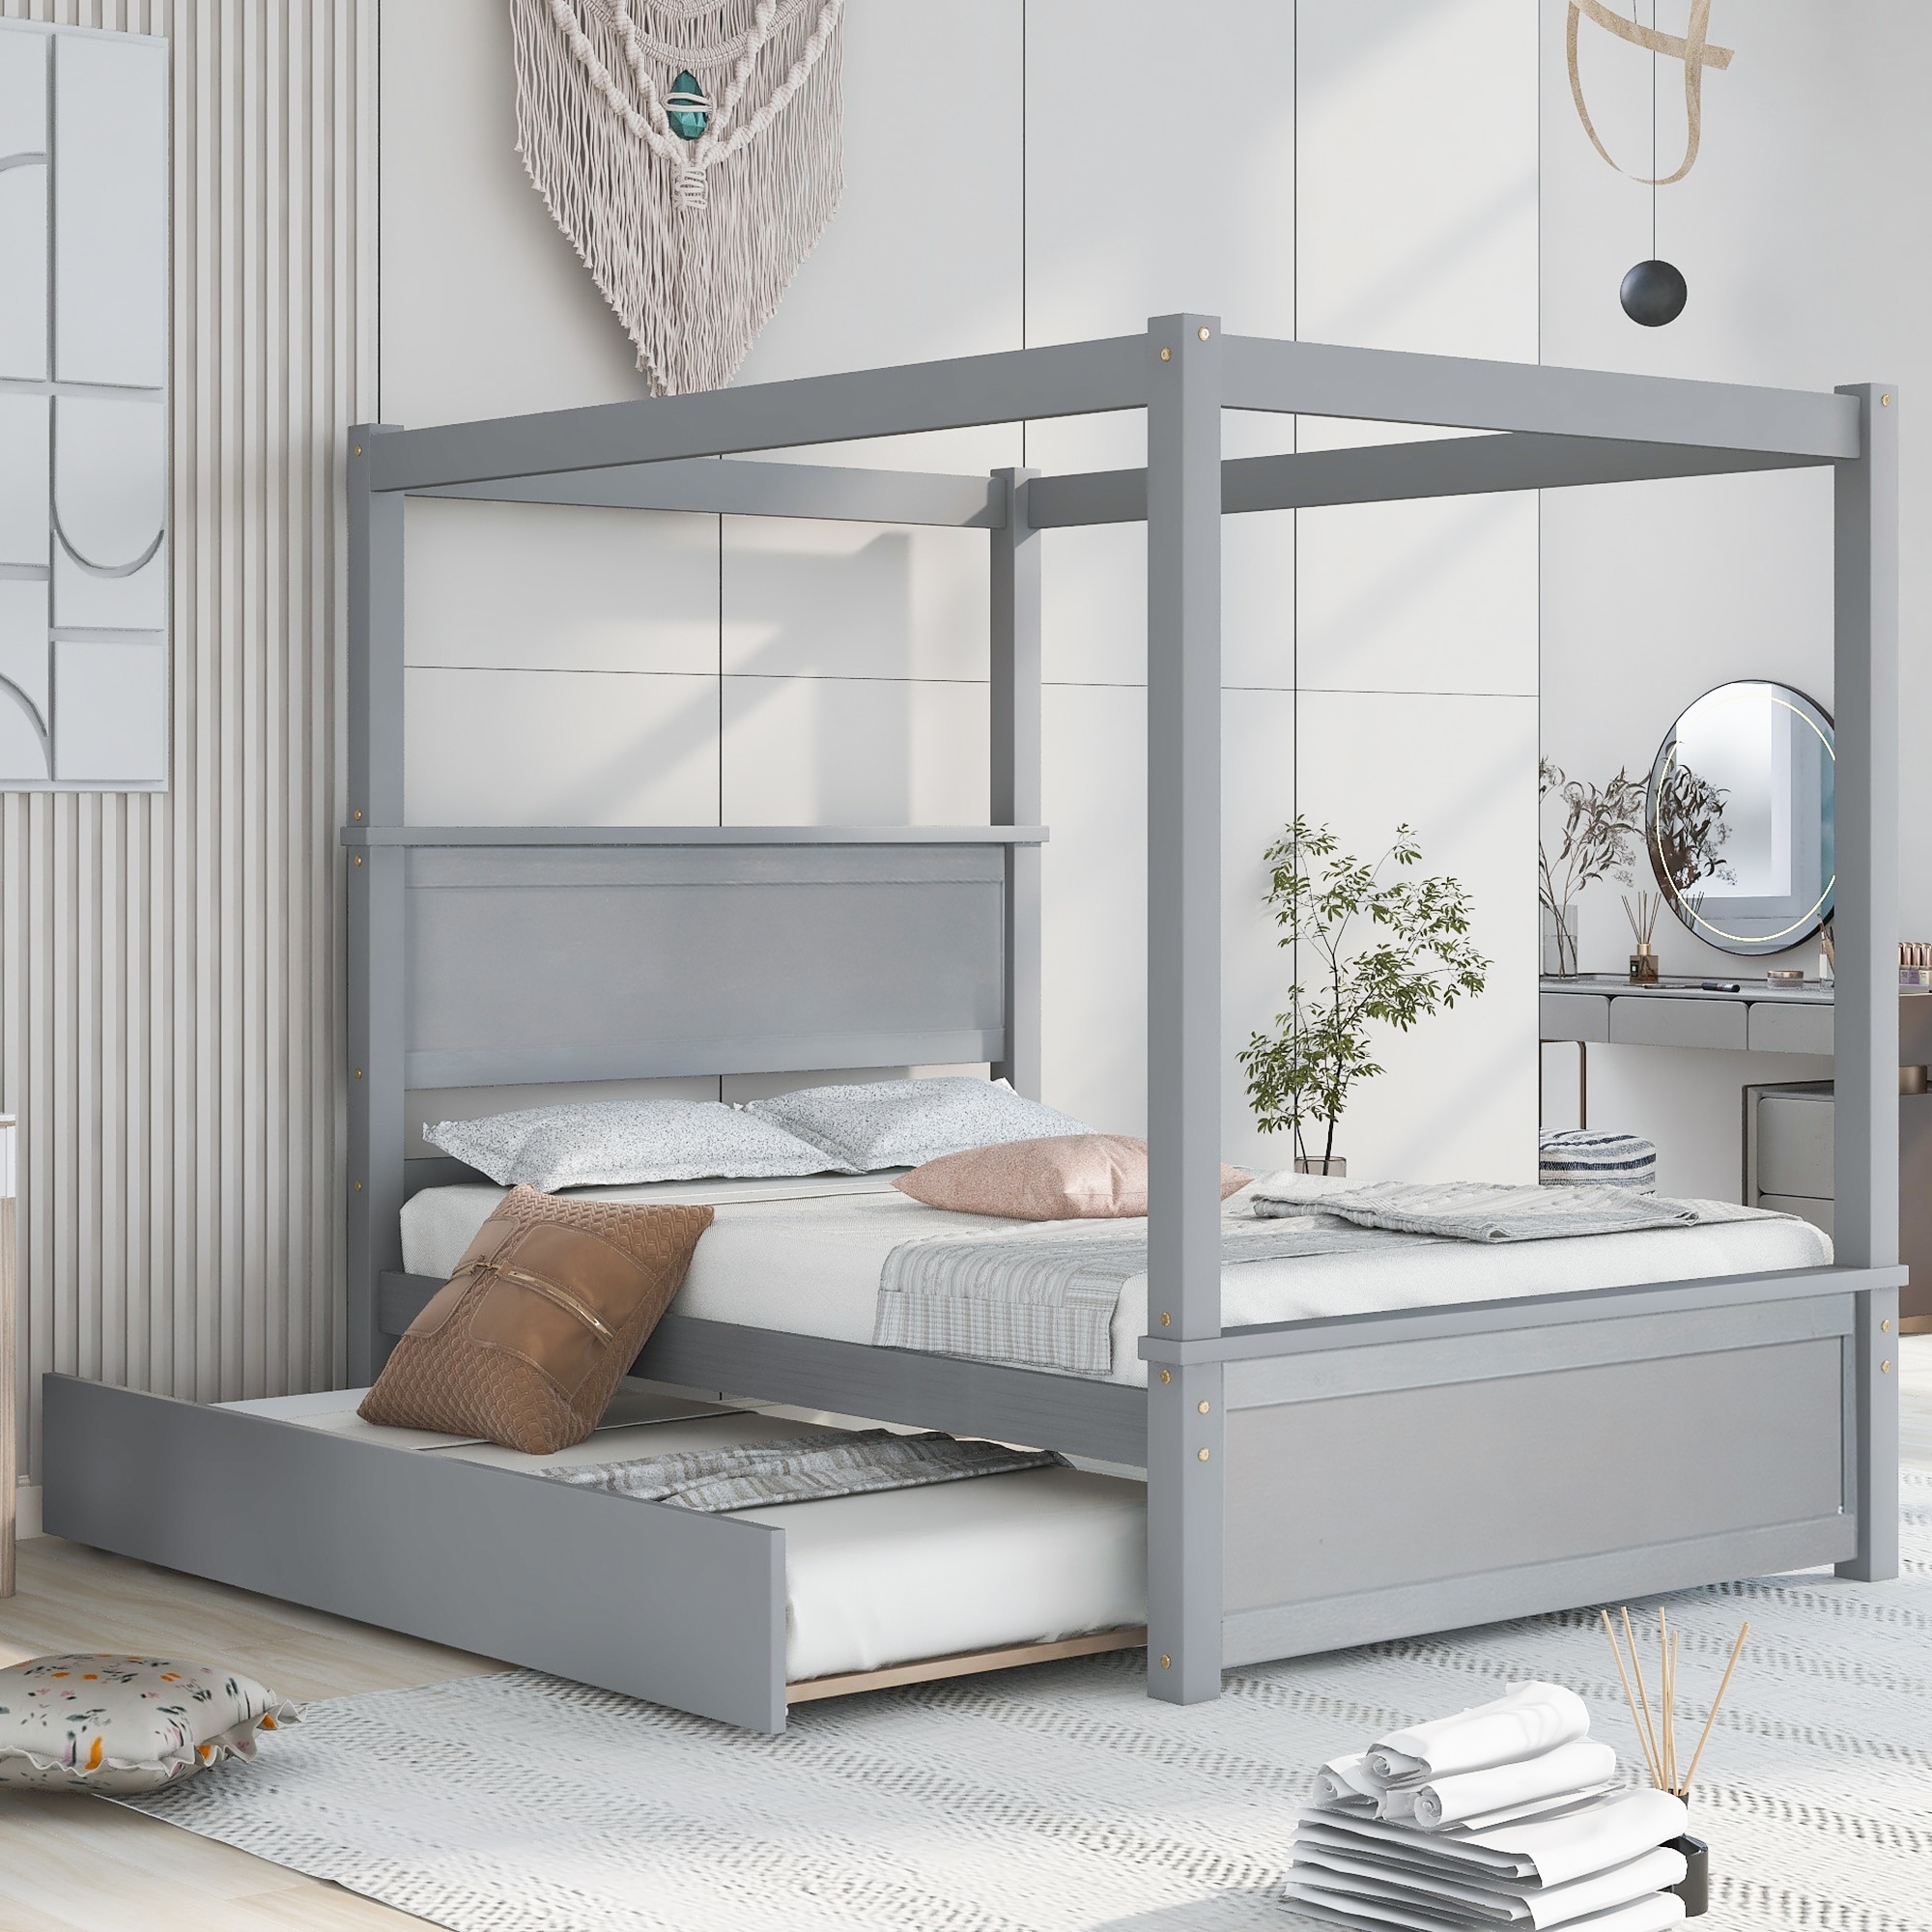 Full Size Canopy Bed With Trundle Bed  Wooden Four-poster Canopy Platform Bed Frame With Support Slats  Full Floor Bed  Grey